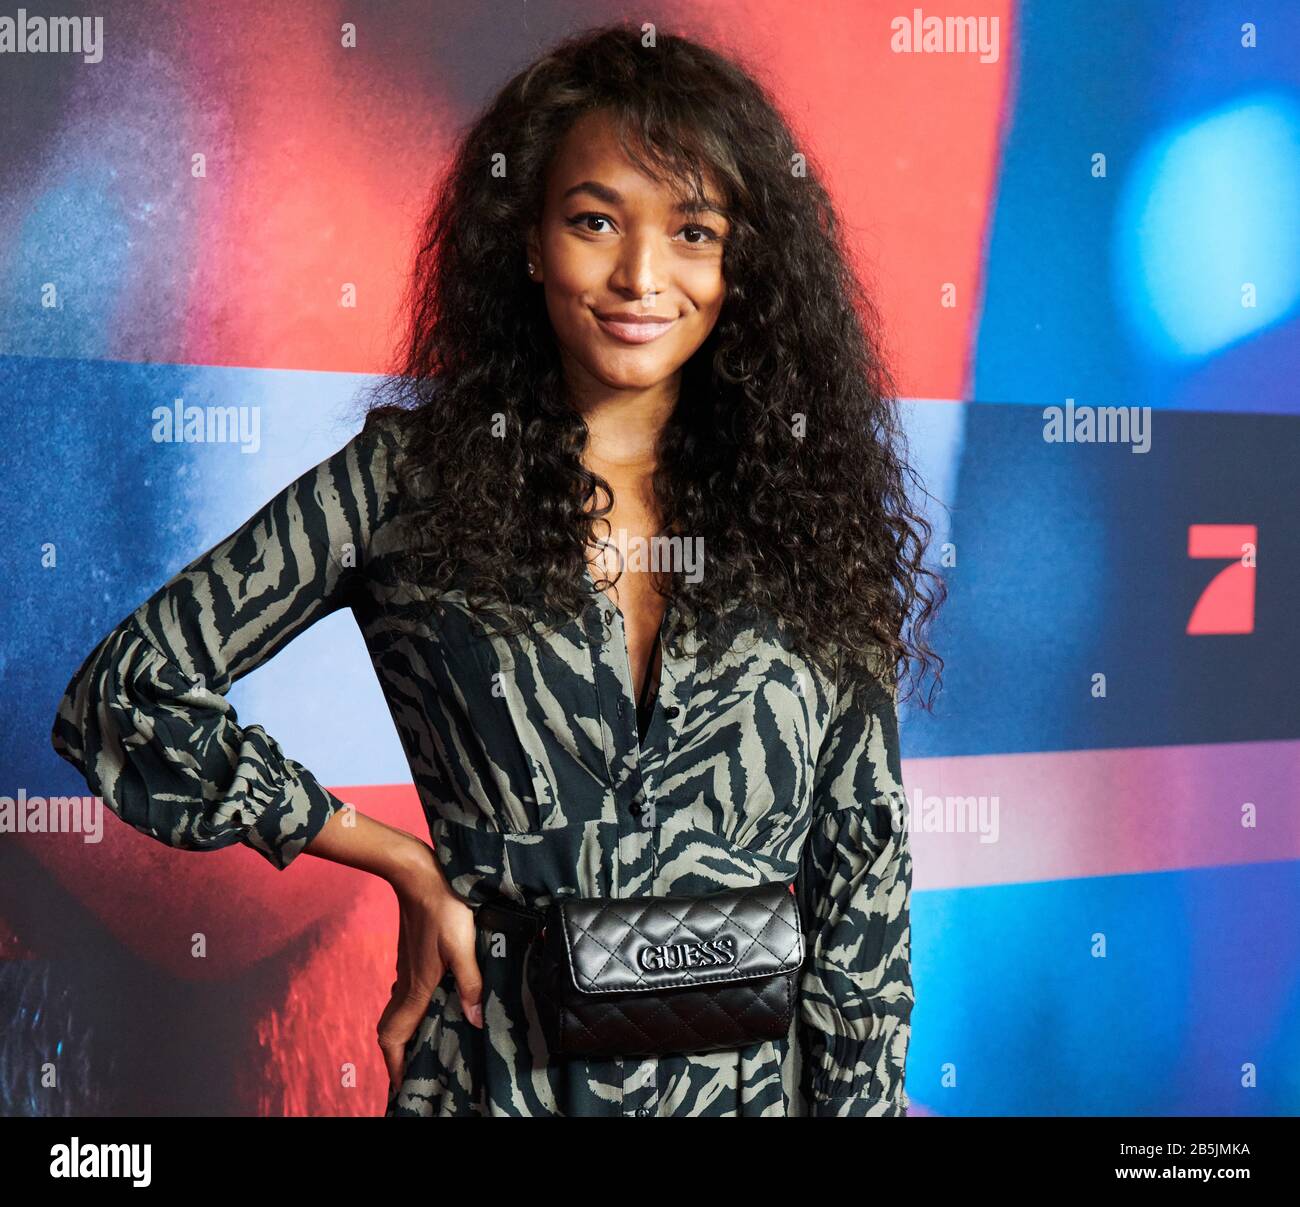 Berlin, Germany. 08th Mar, 2020. Cassandra, Germanys Next Topmodel 2020,  comes to the premiere "9 days awake" of the ProSieben blockbuster. Credit:  Annette Riedl/dpa/Alamy Live News Stock Photo - Alamy